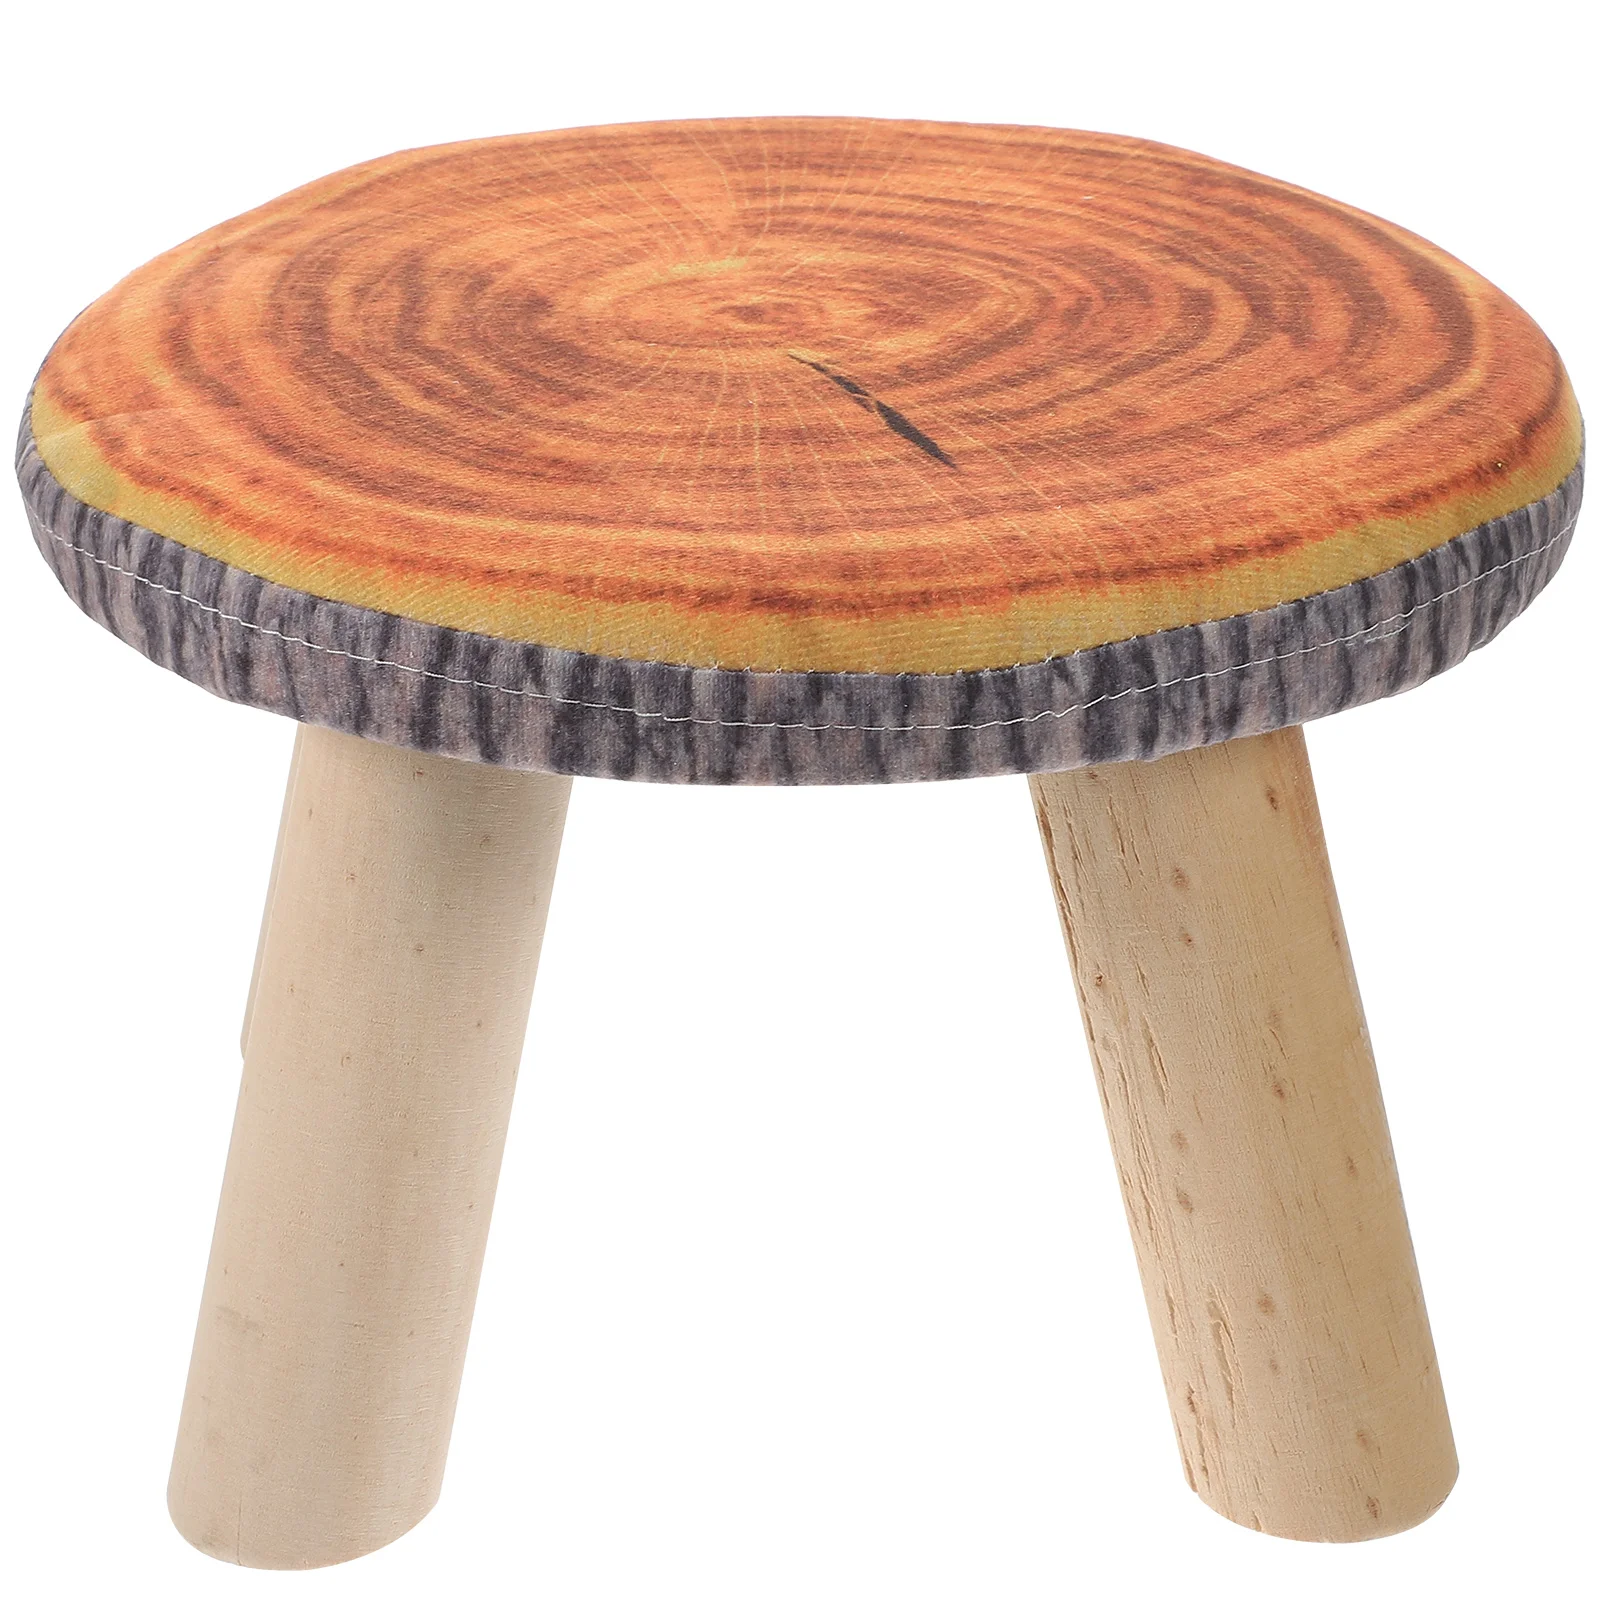 Small Bench Wooden Stool Chair Toddler Classroom Stools Cute Short Stepping Kids Sitting